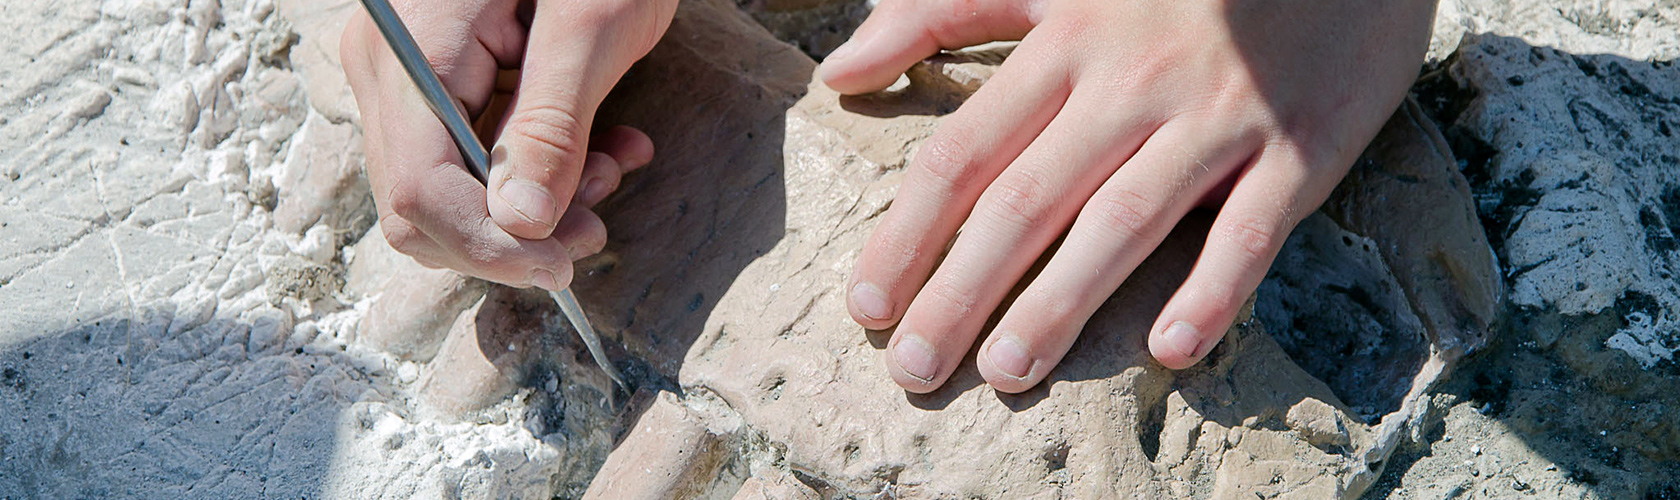 hands_digging_fossil